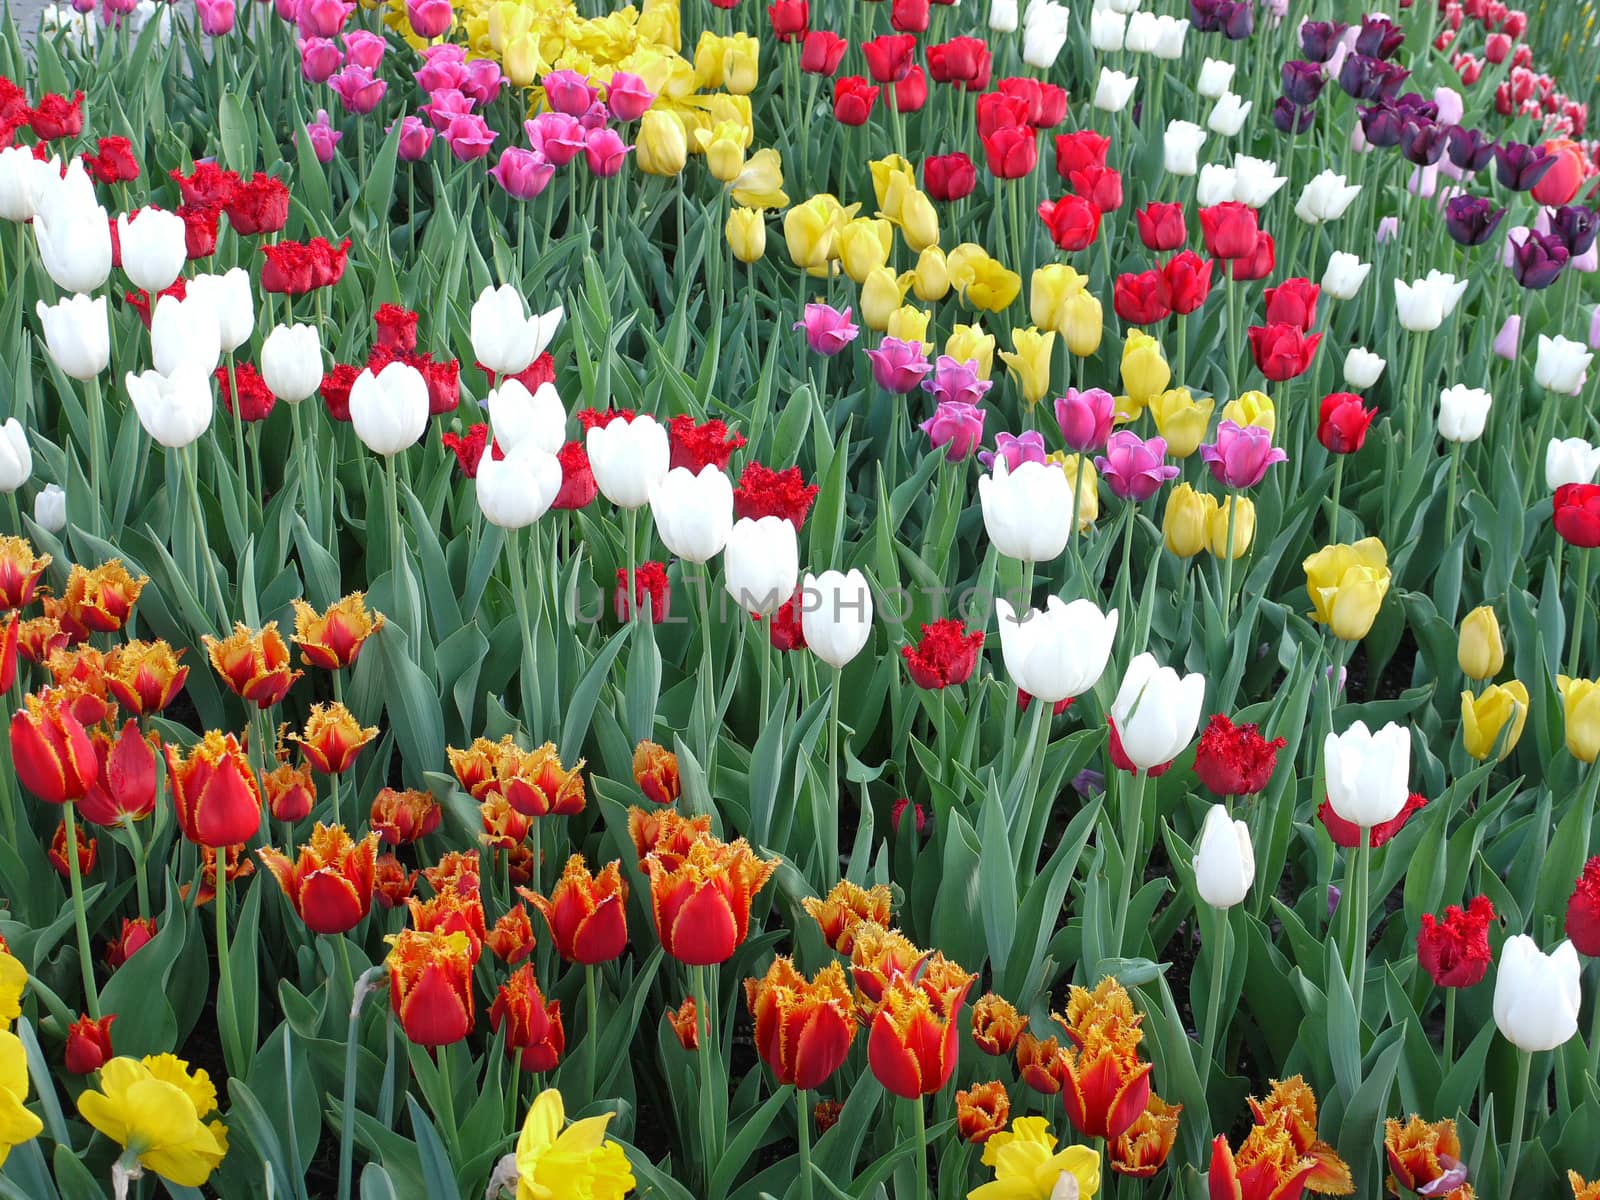 elegant and unsurpassed tulips on the flower bed for every taste and color by Adamchuk